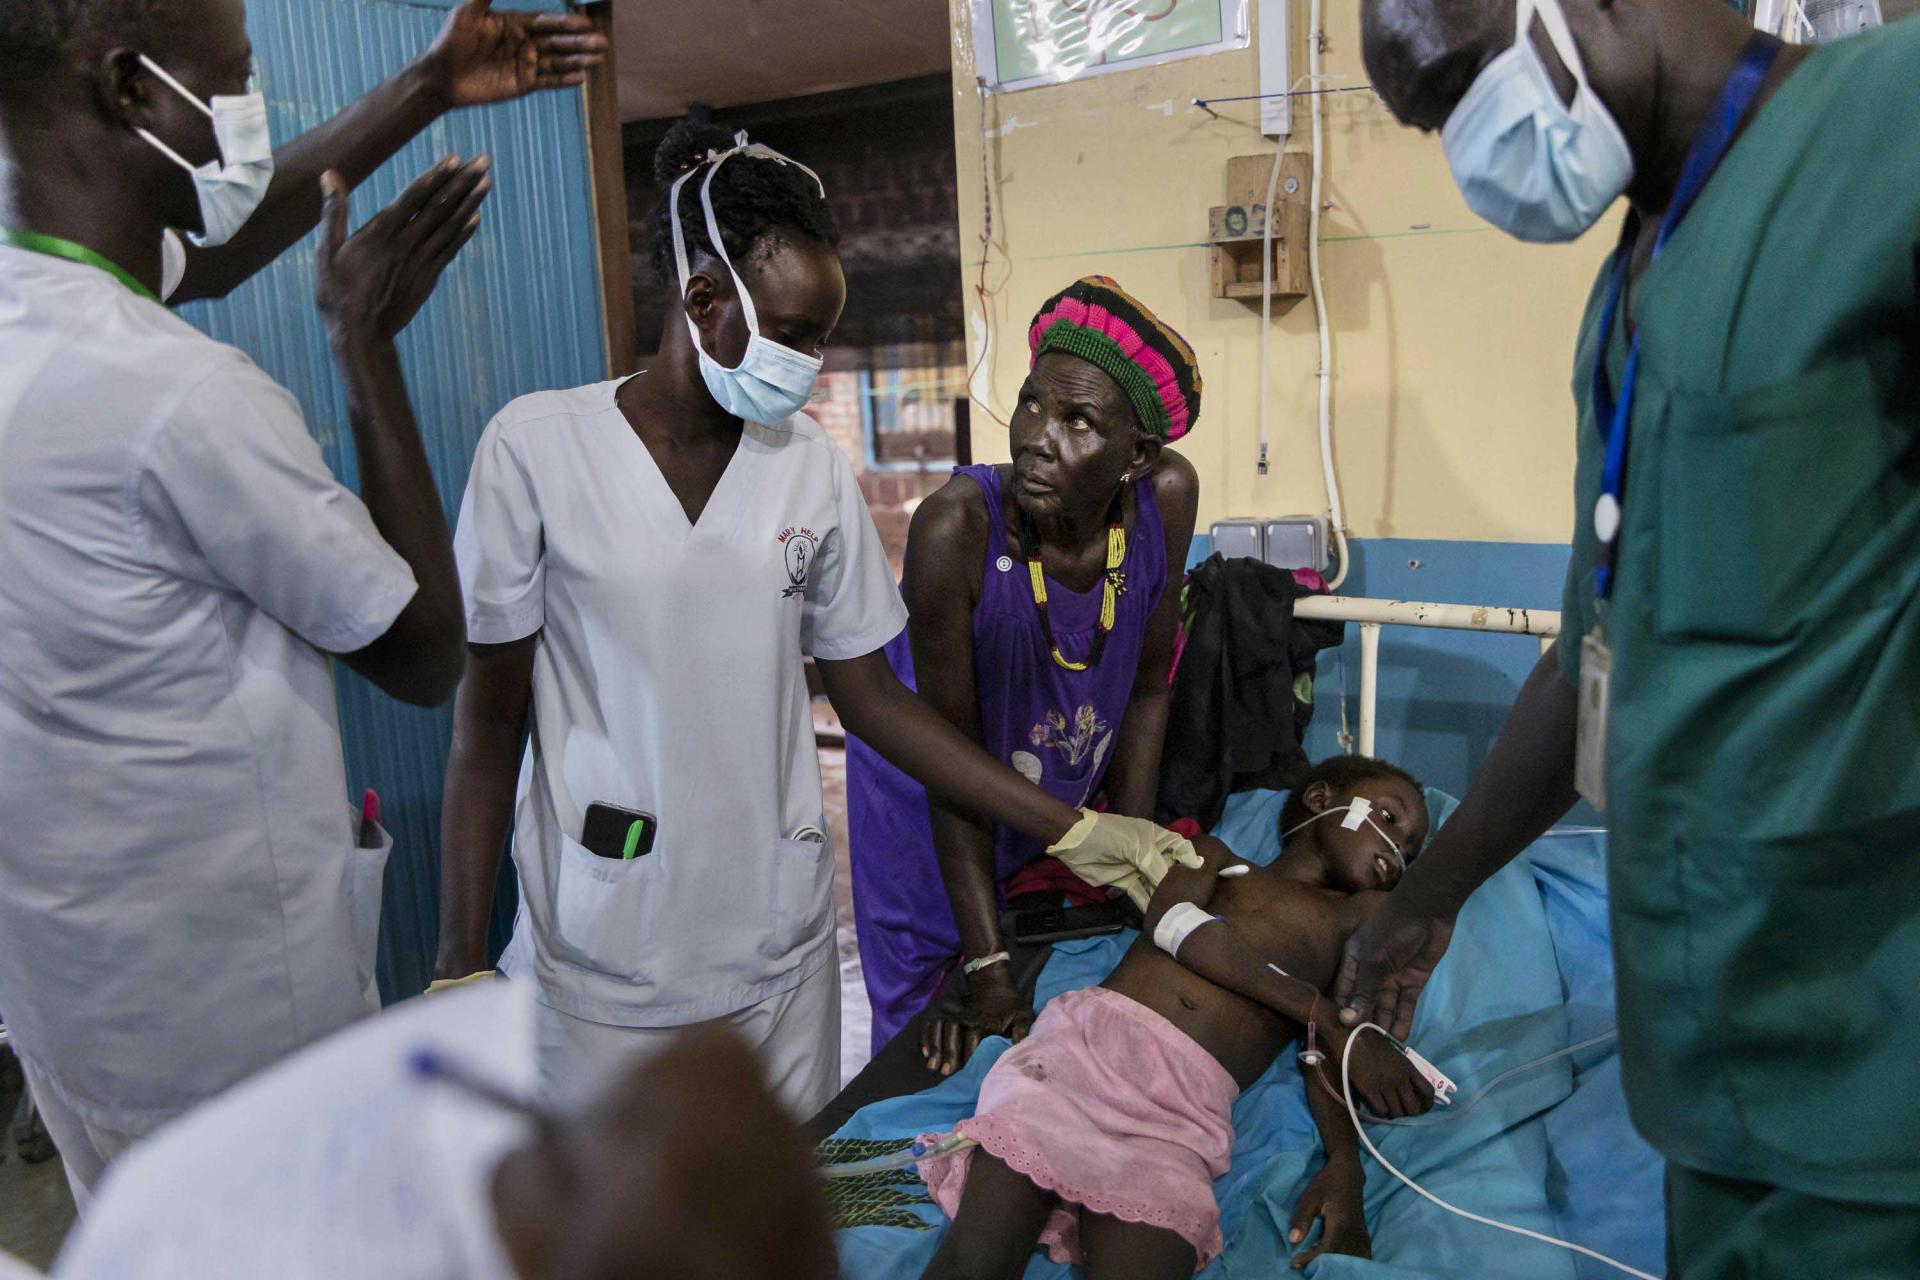 Atong Dut Deng, 8 years old, infected with celebral malaria. She is being attended to by MSF medical staff in the ICU at MSF supported Aweil State Hospital.